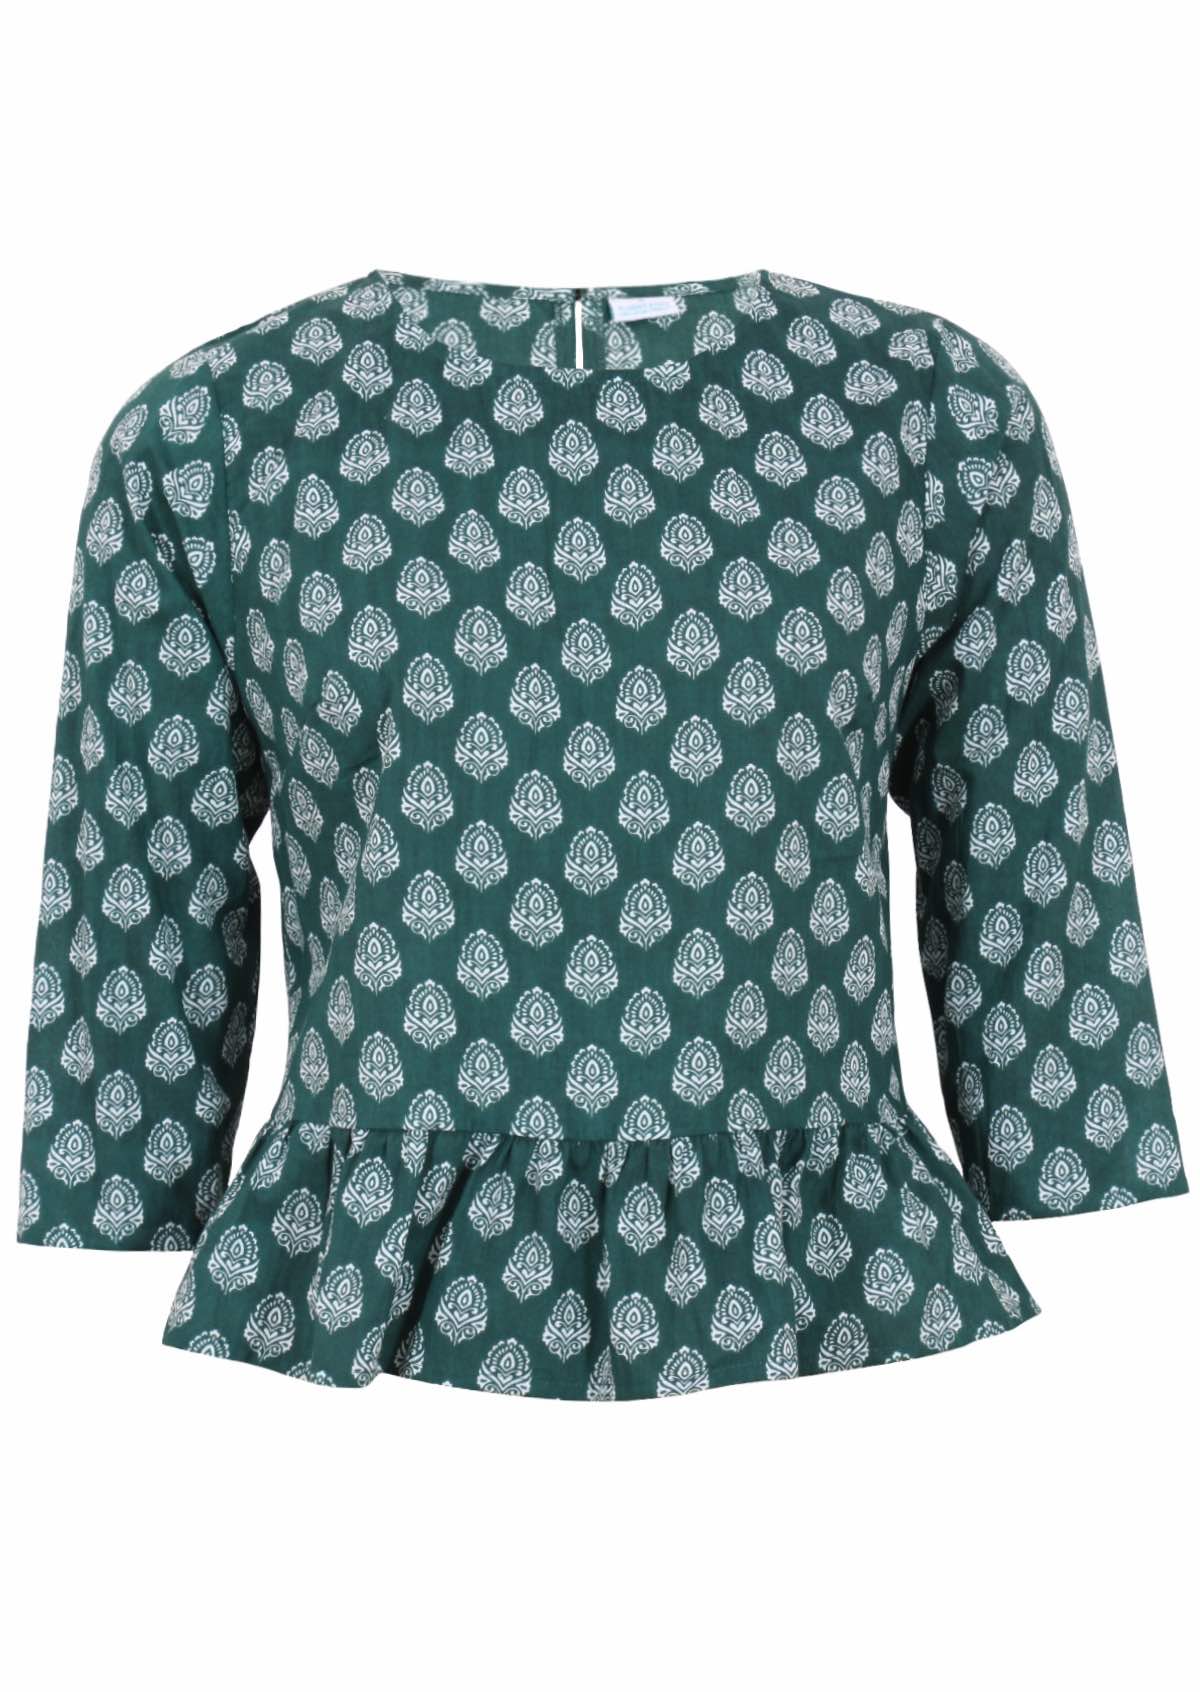 Cotton top with round neckline, 3/4 sleeves and peplum frill